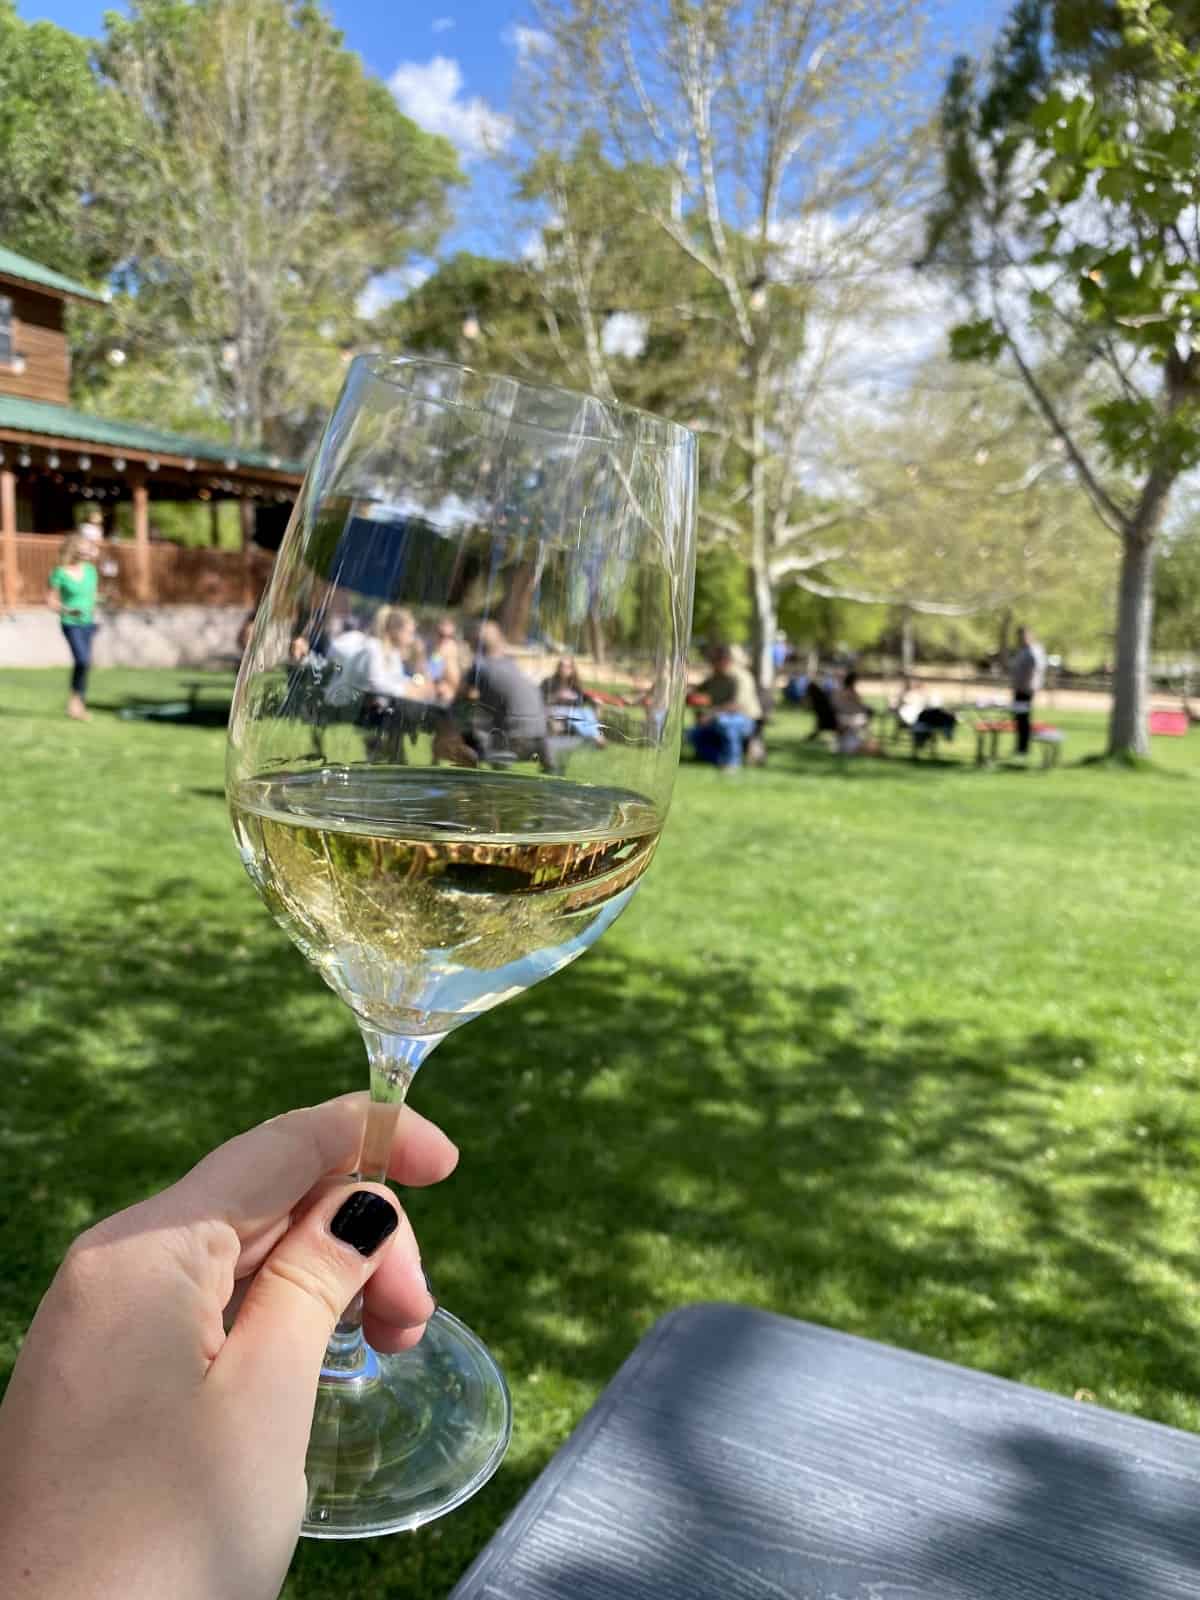 A Guide to Sedona Wineries | Wine tasting in Sedona, Arizona, was quite a surprise and makes a perfect day trip from Sedona. Most of these wineries are only 20 minutes from downtown Sedona and are a lovely day of wine, music, & scenery. Arizona wineries you should visit, what to do in Sedona! #sedona #wineries #arizona